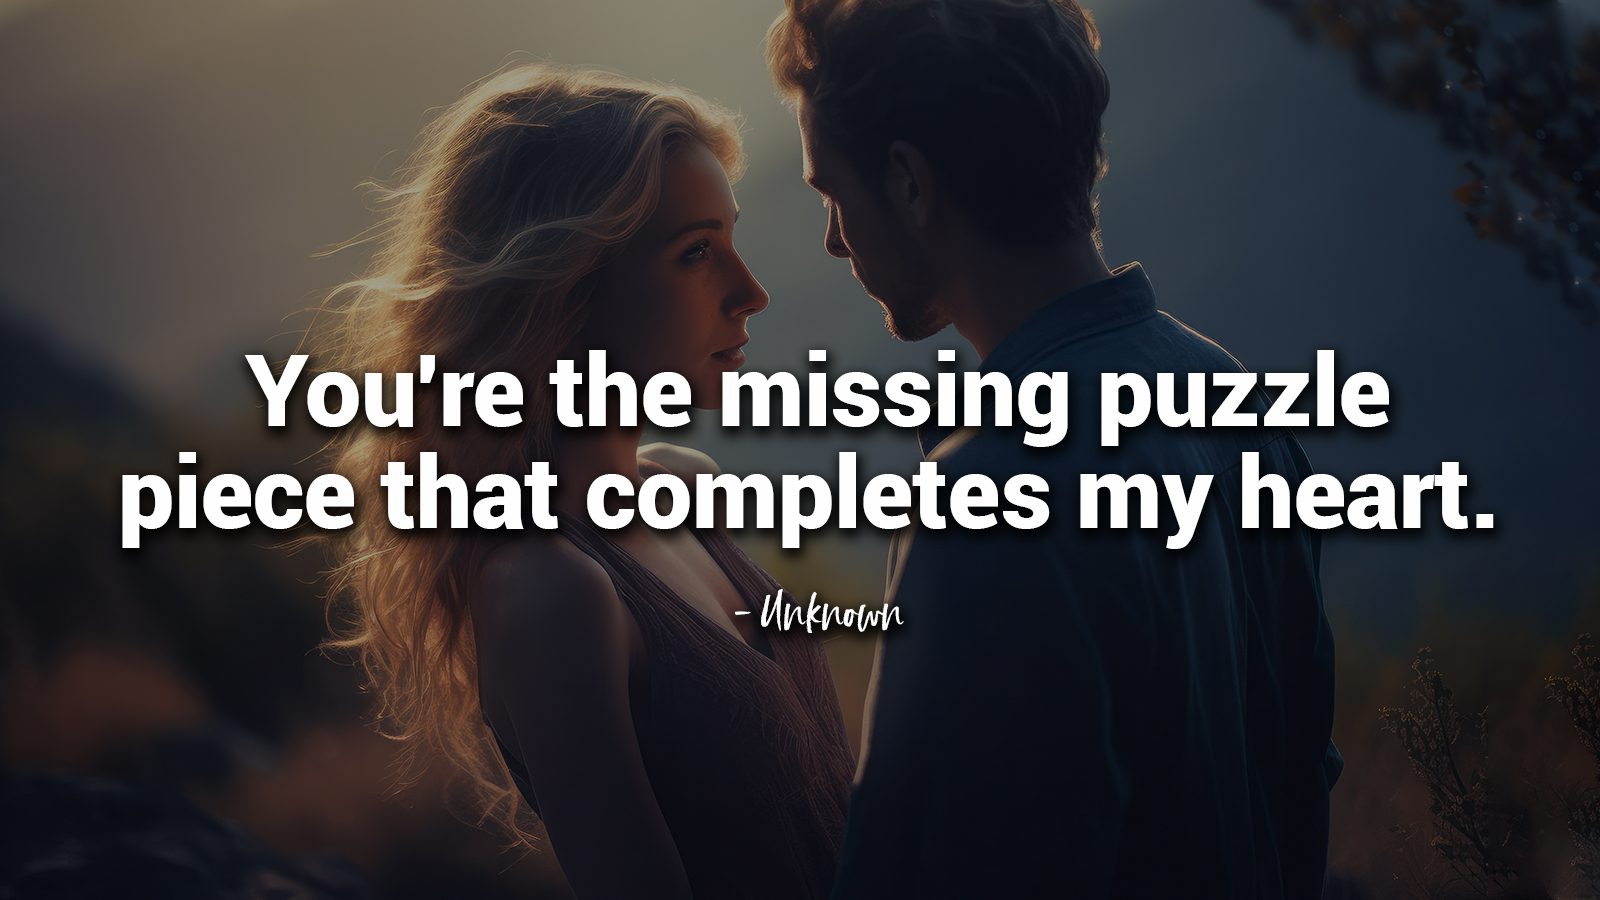 love quotes for him